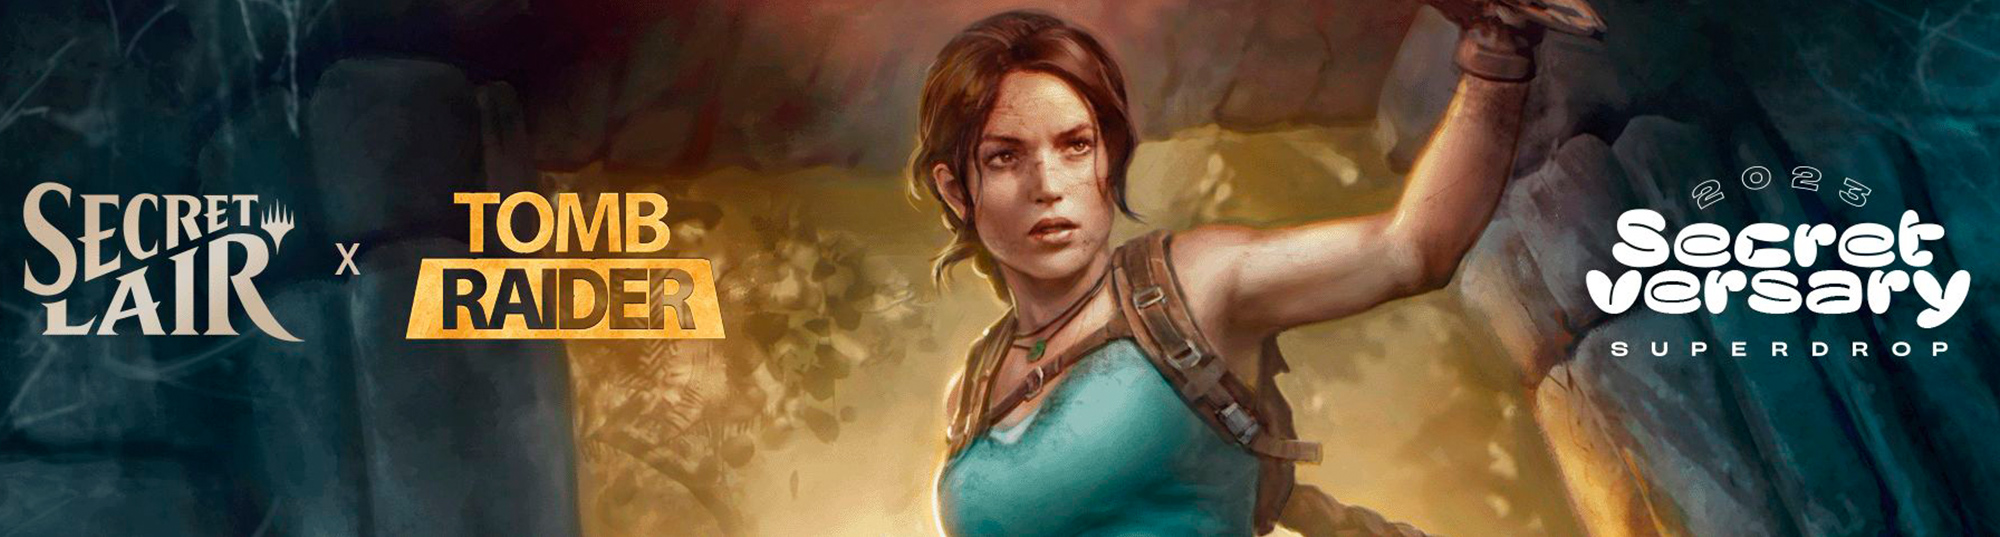 Tomb Raider special edition of Magic cards